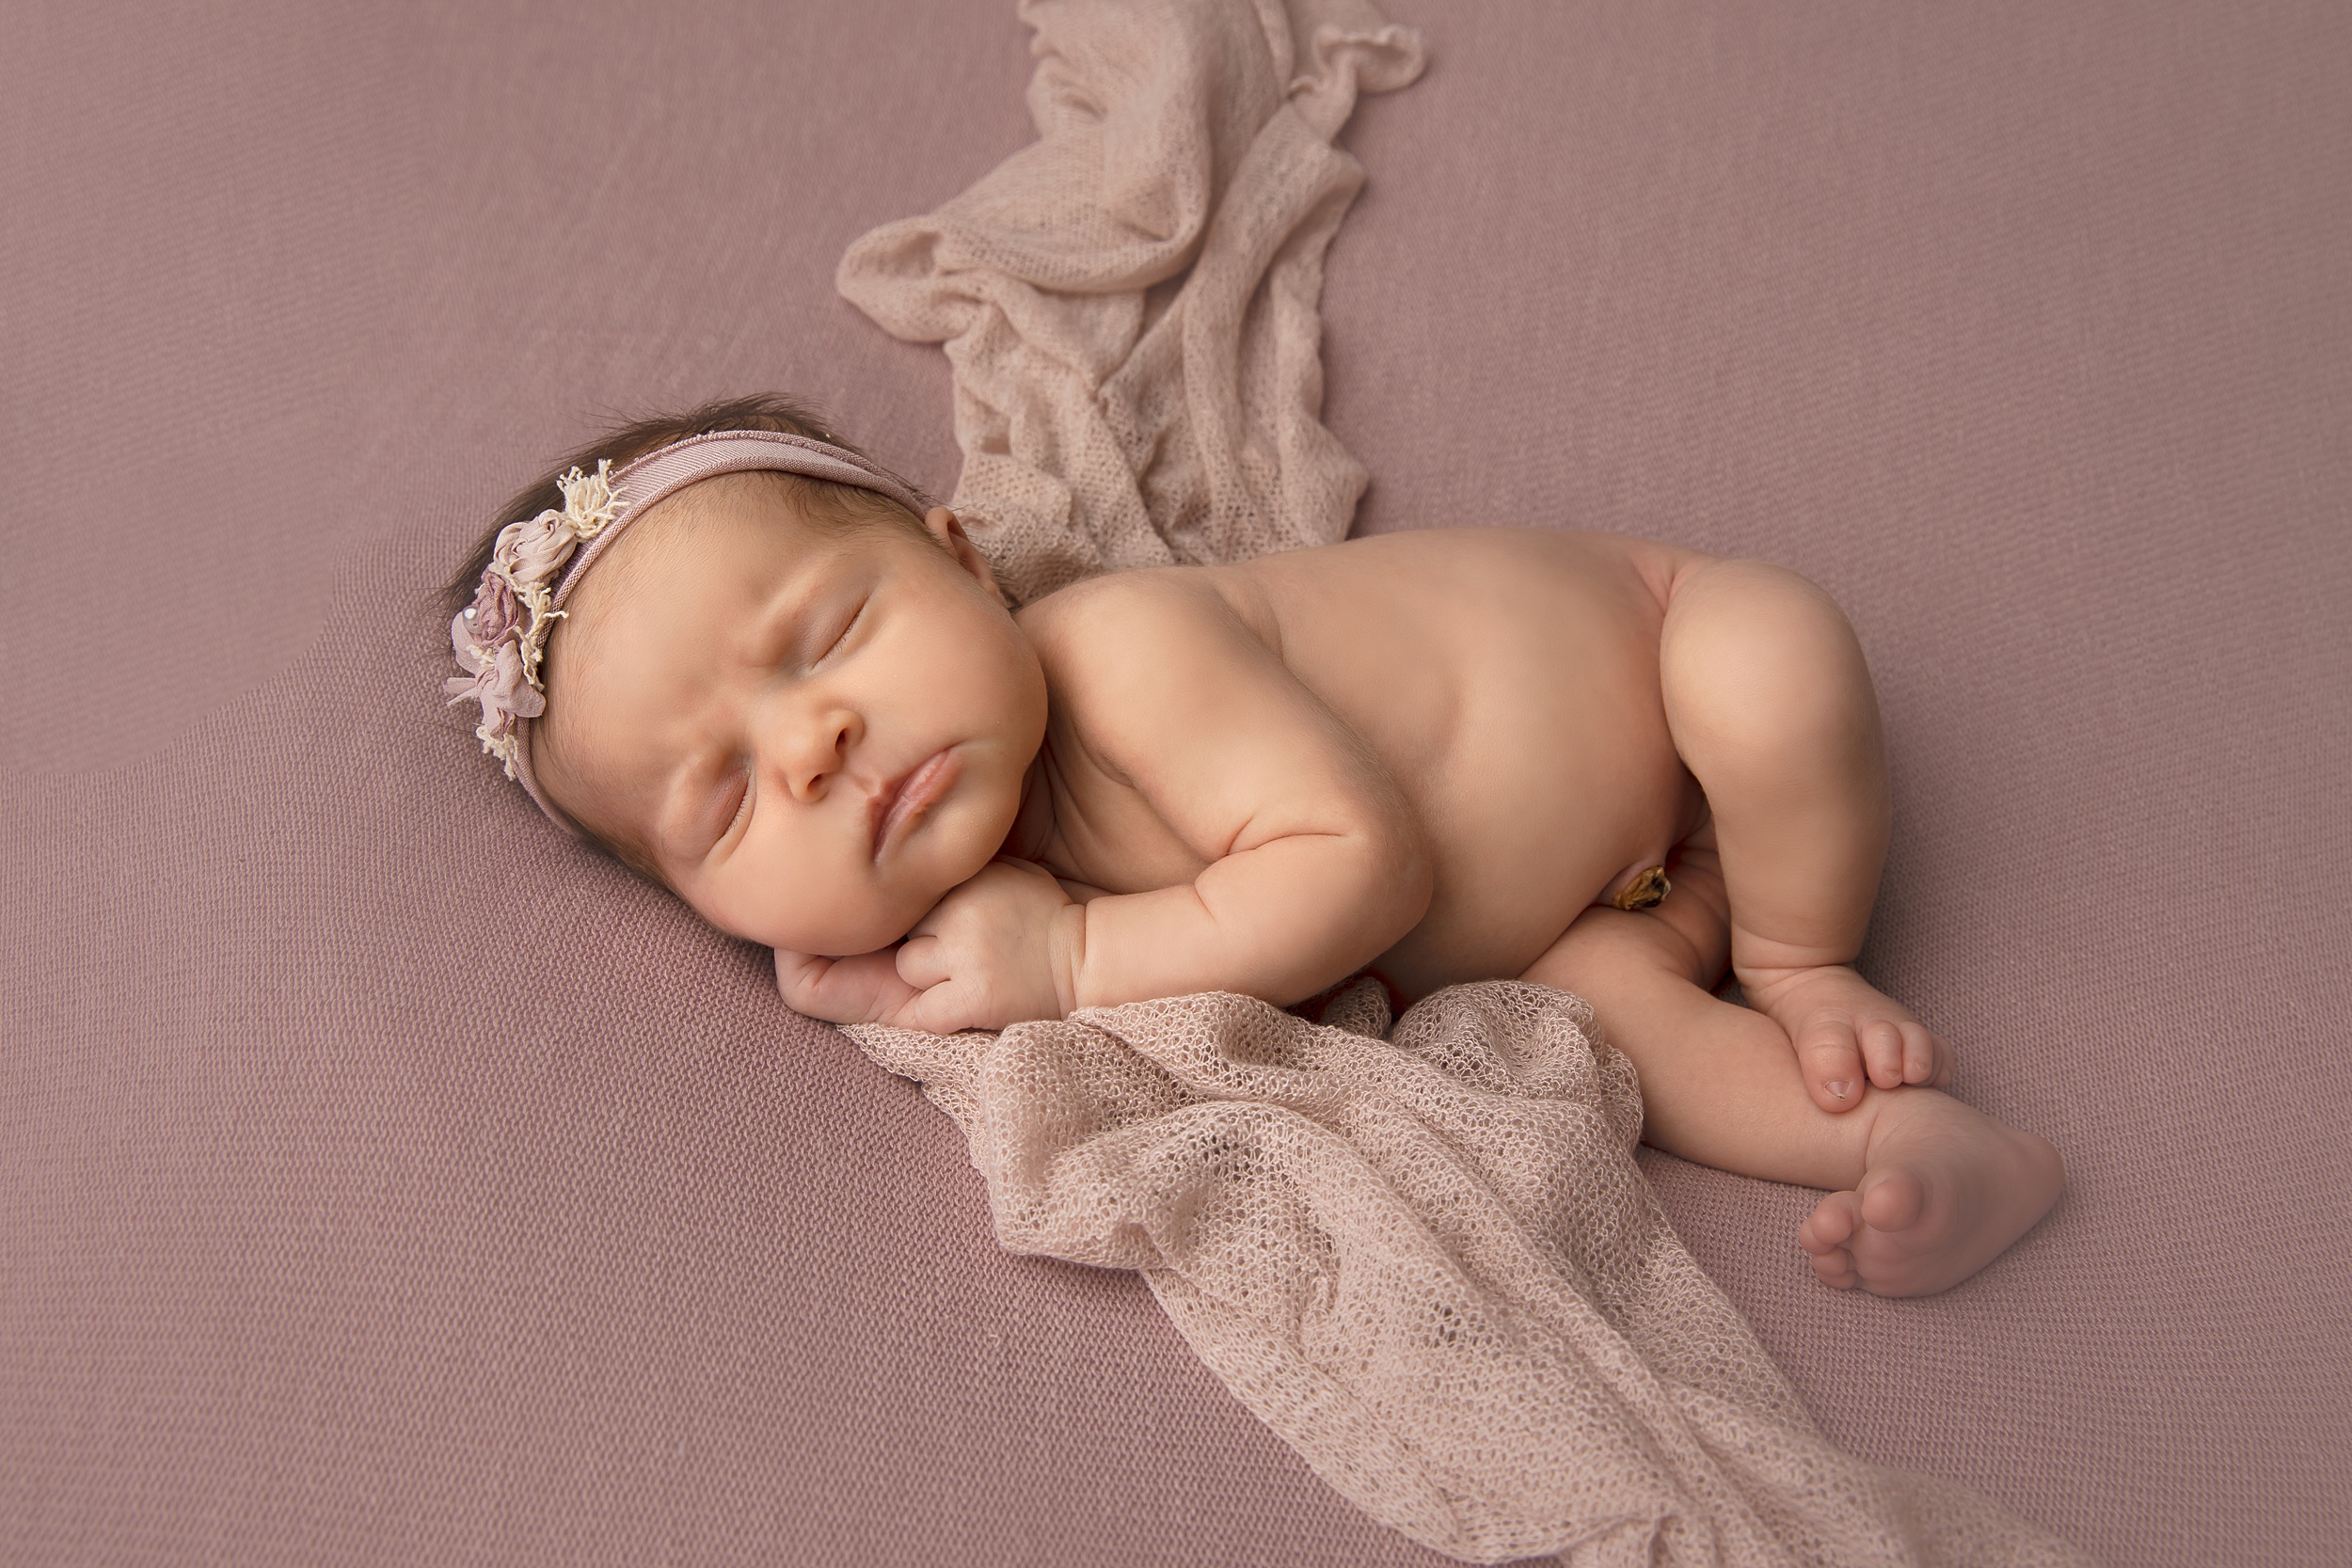 A newborn baby sleeps on its side on a pink bed wearing a headband raleigh nannies